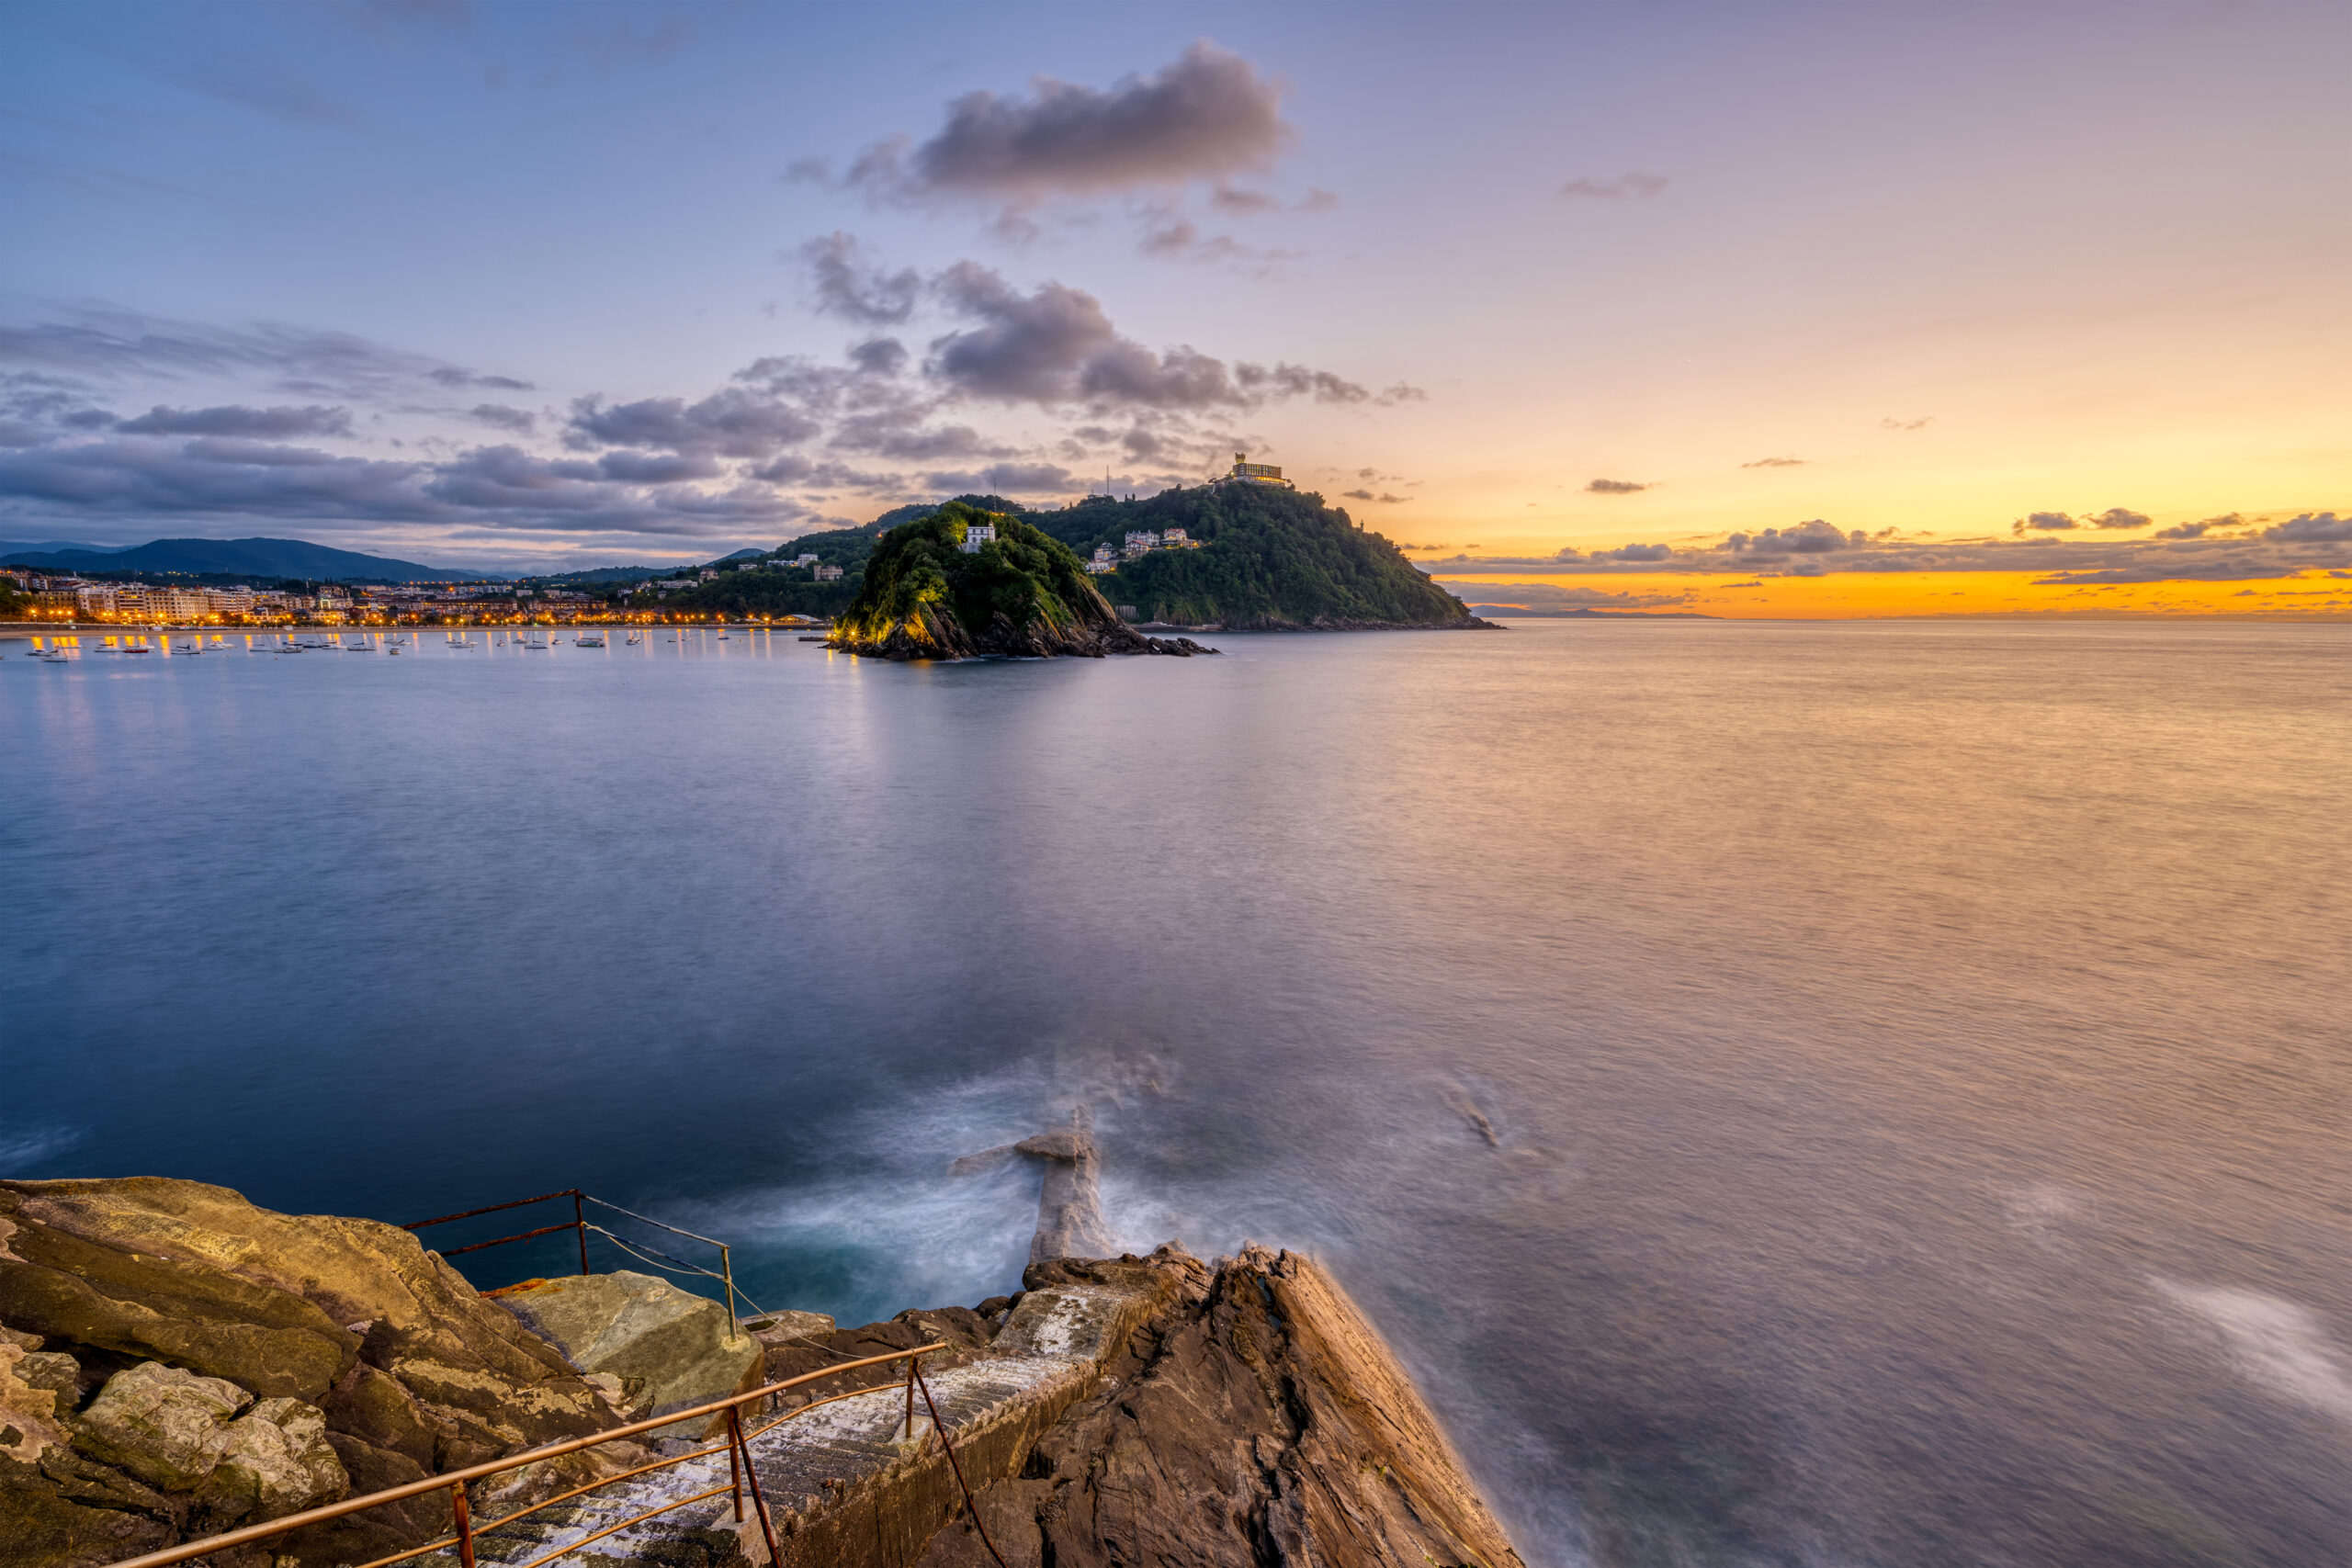 Photo of the bay in San Sebastian at sunset, with hills and the lights of the harbor in the background.